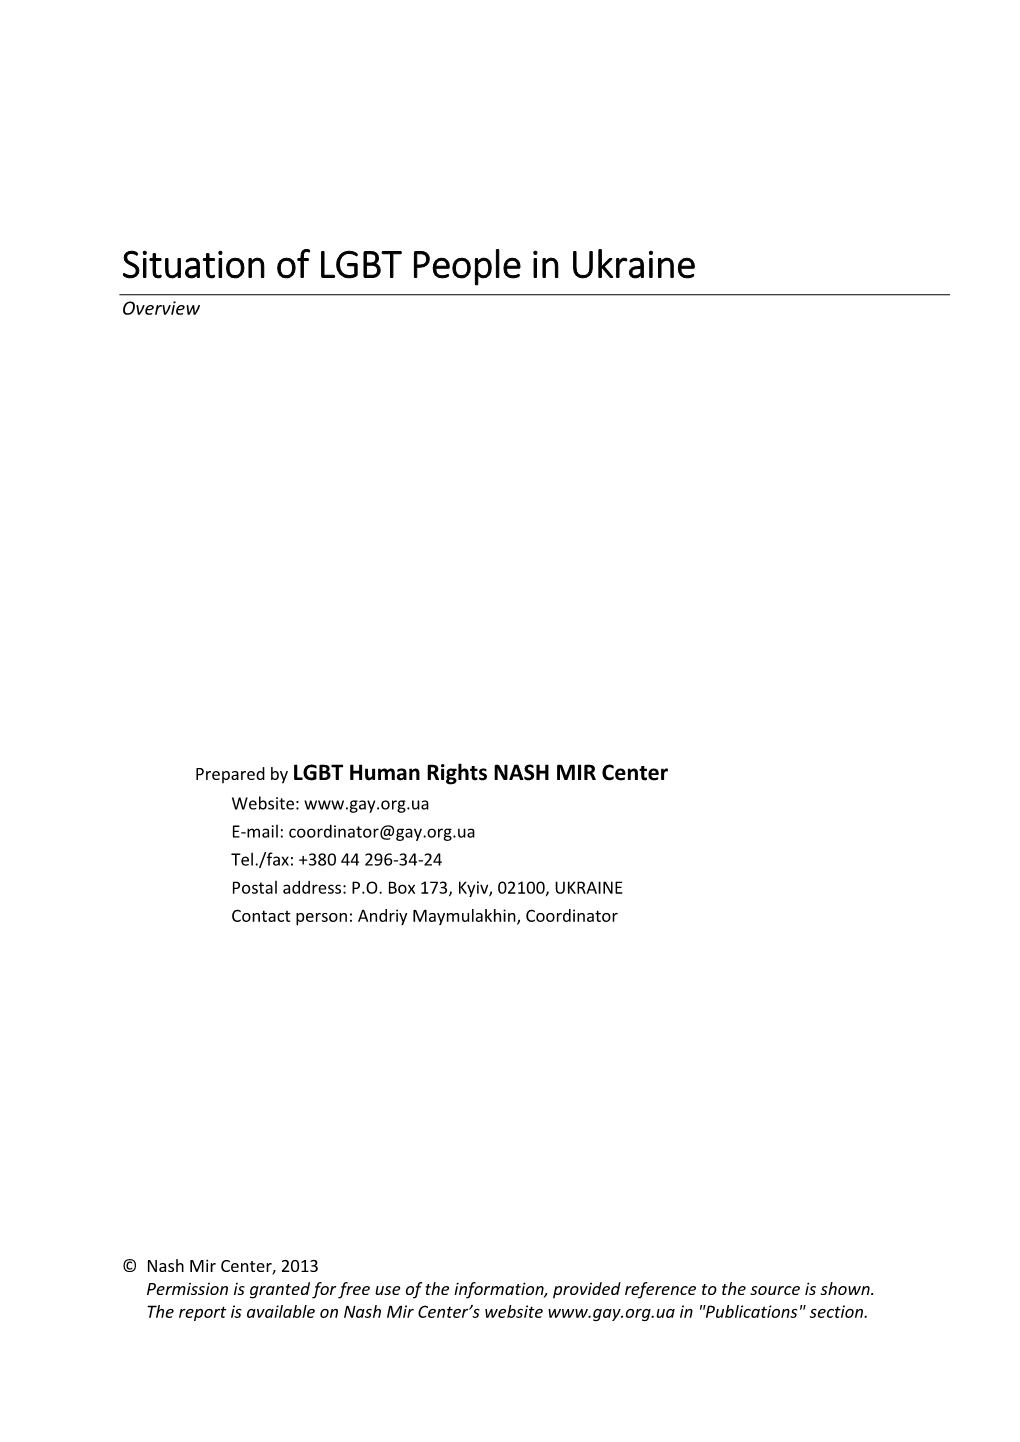 Situation of LGBT People in Ukraine Overview